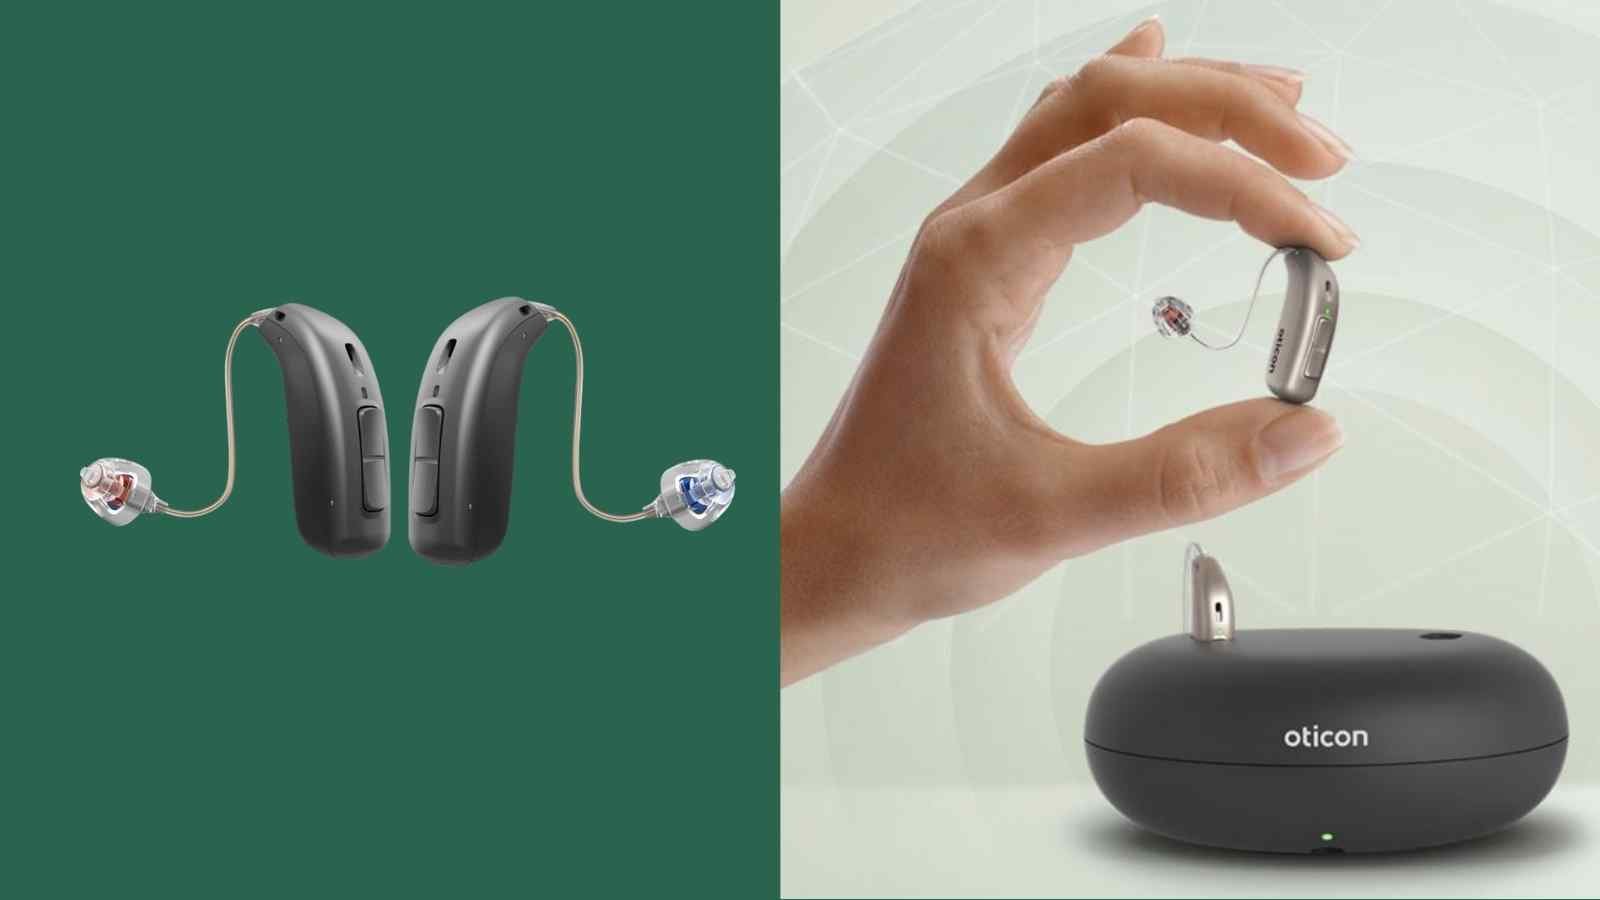 Image showing Oticon More hearing aids in hand and in a charging case